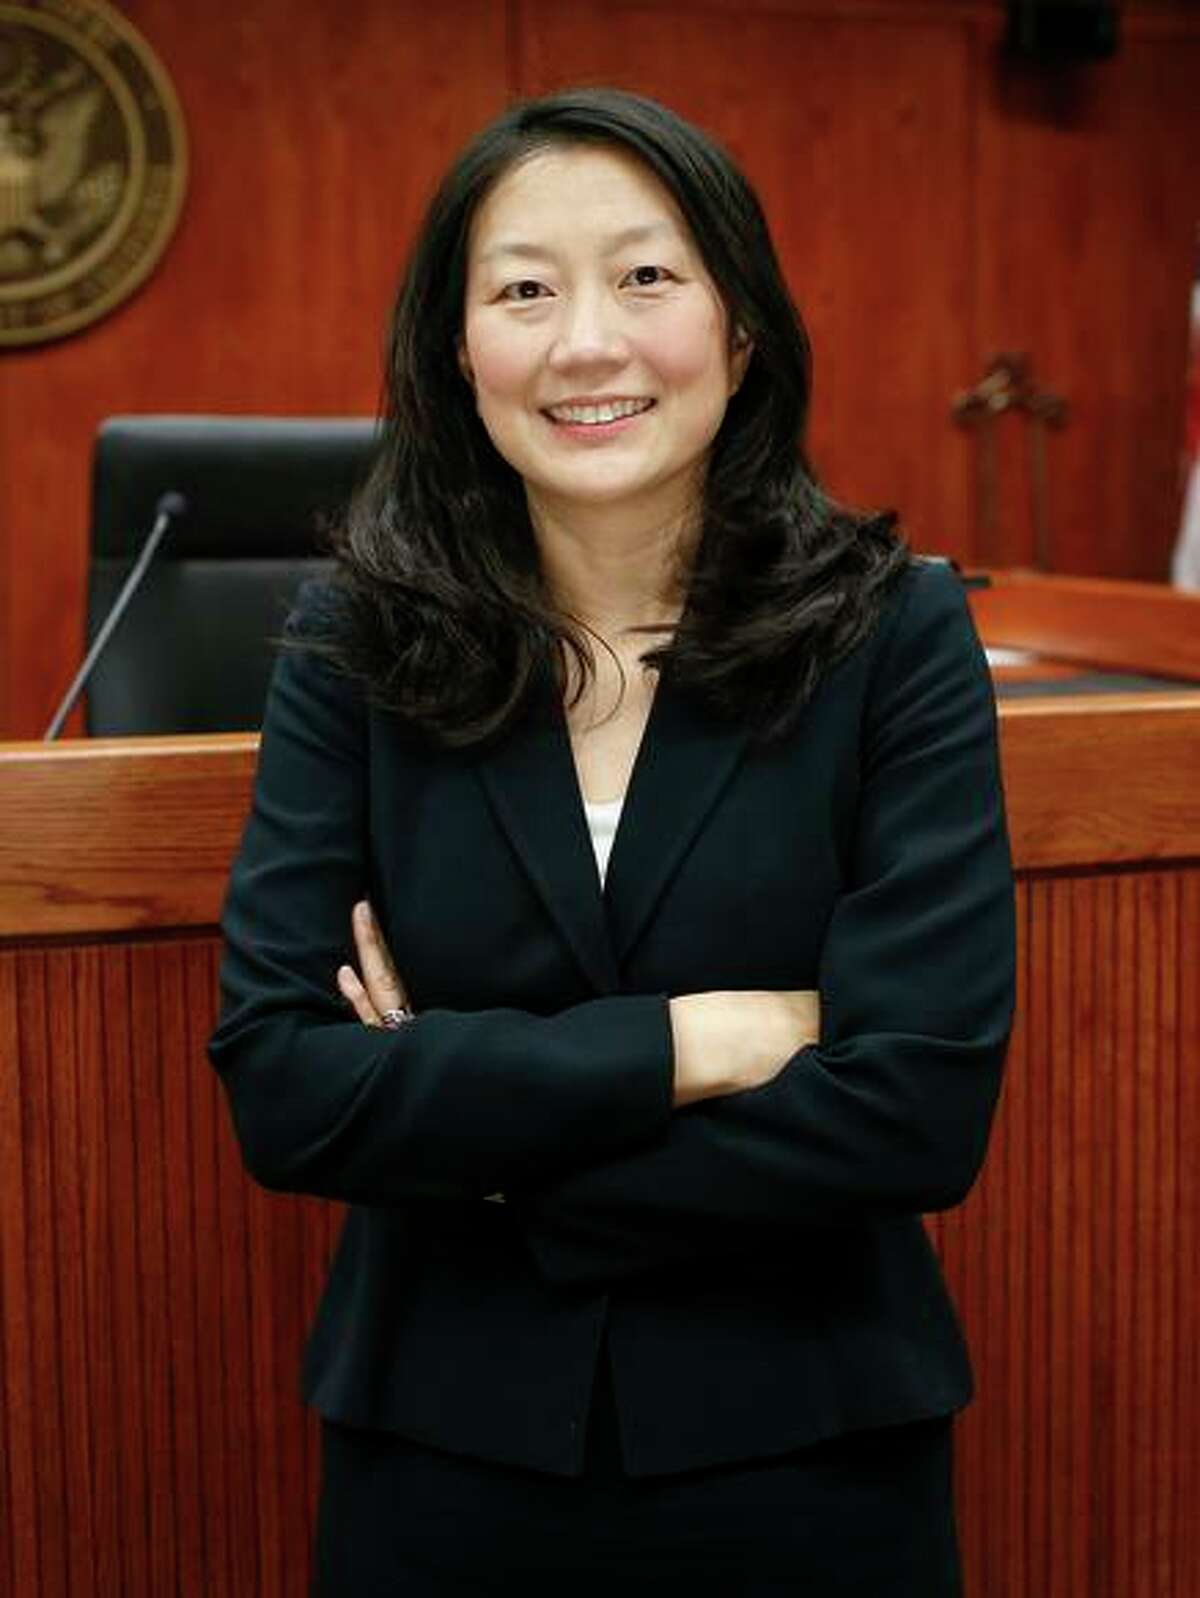 U.S. District Judge Lucy Koh of San Jose has issued a nationwide injunction ordering the Census Bureau to return to its previous schedule of counting residents through Oct. 31.